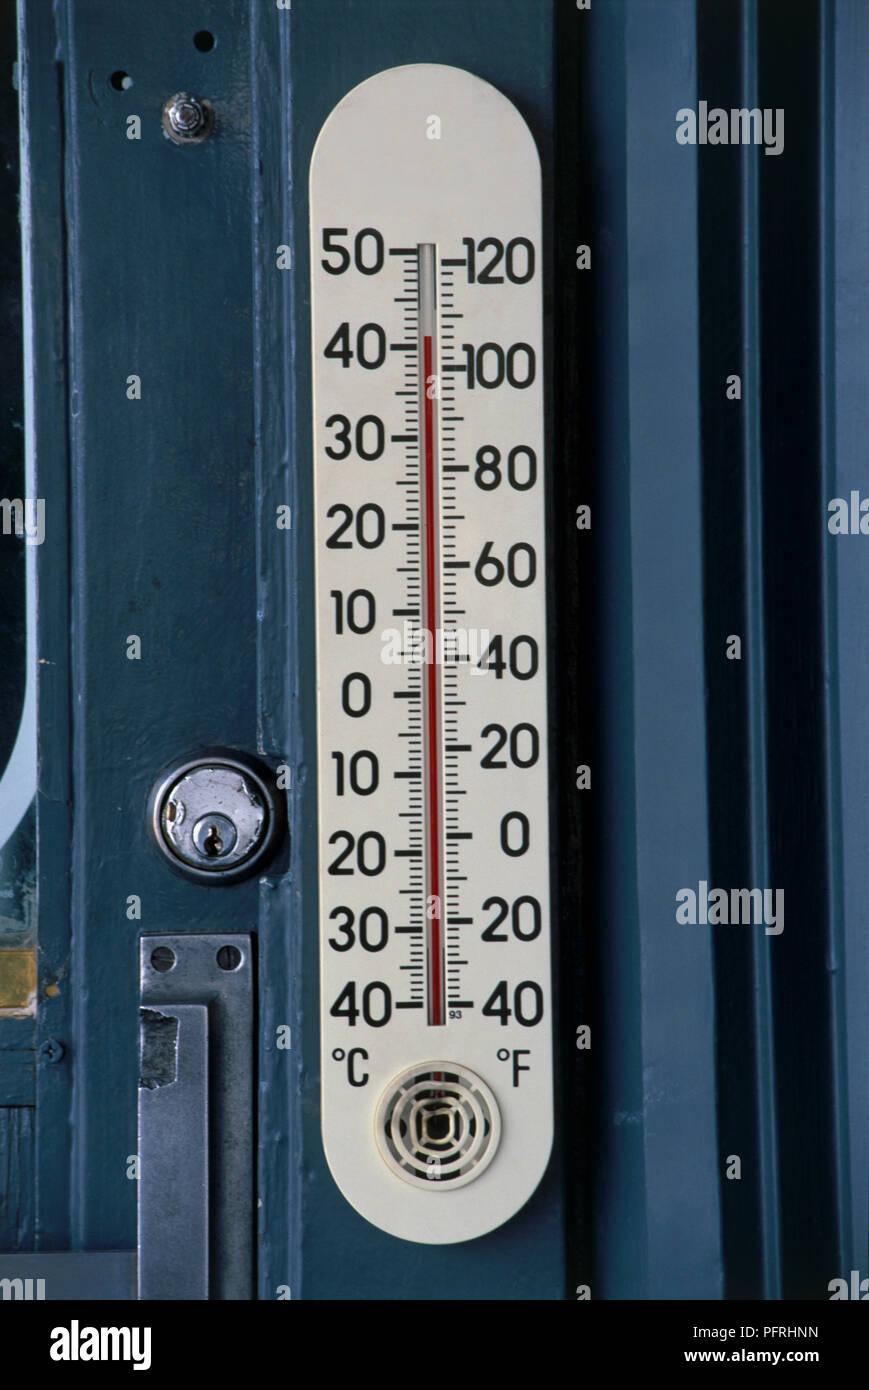 https://c8.alamy.com/comp/PFRHNN/usa-nevada-las-vegas-temperature-gauge-with-celsius-and-fahrenheit-displayed-PFRHNN.jpg